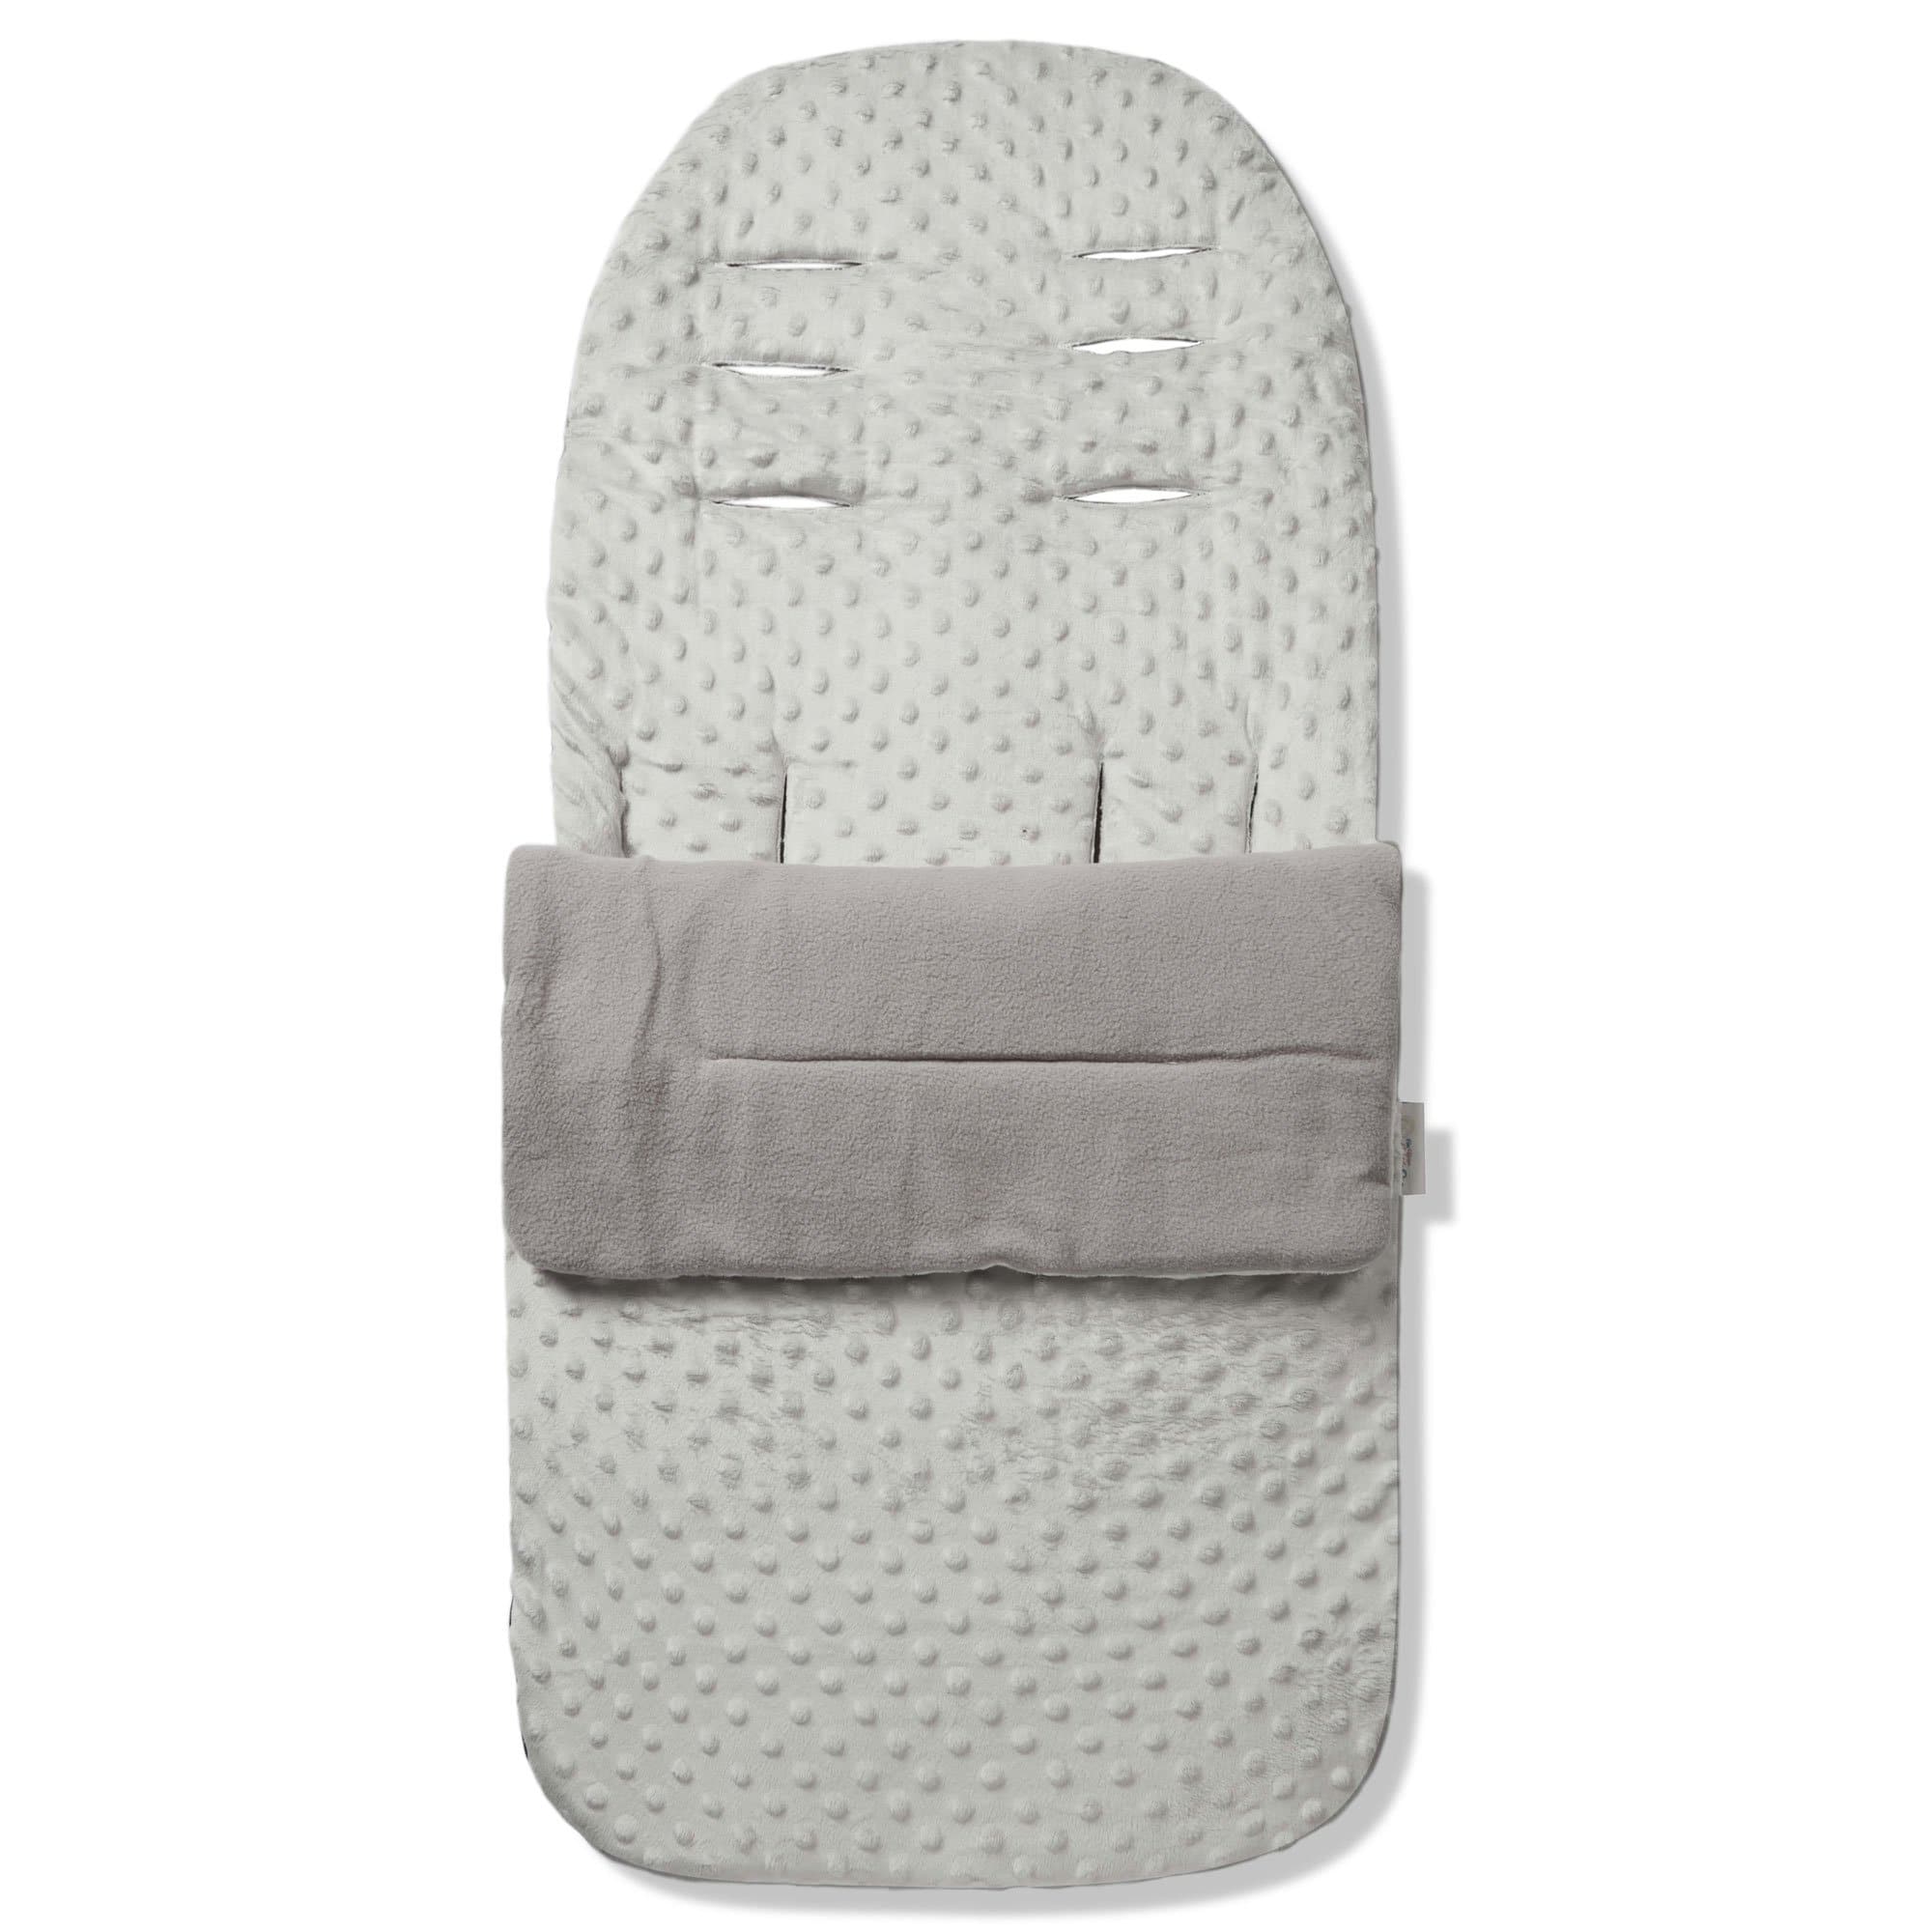 Dimple Footmuff / Cosy Toes Compatible with Noukies - For Your Little One